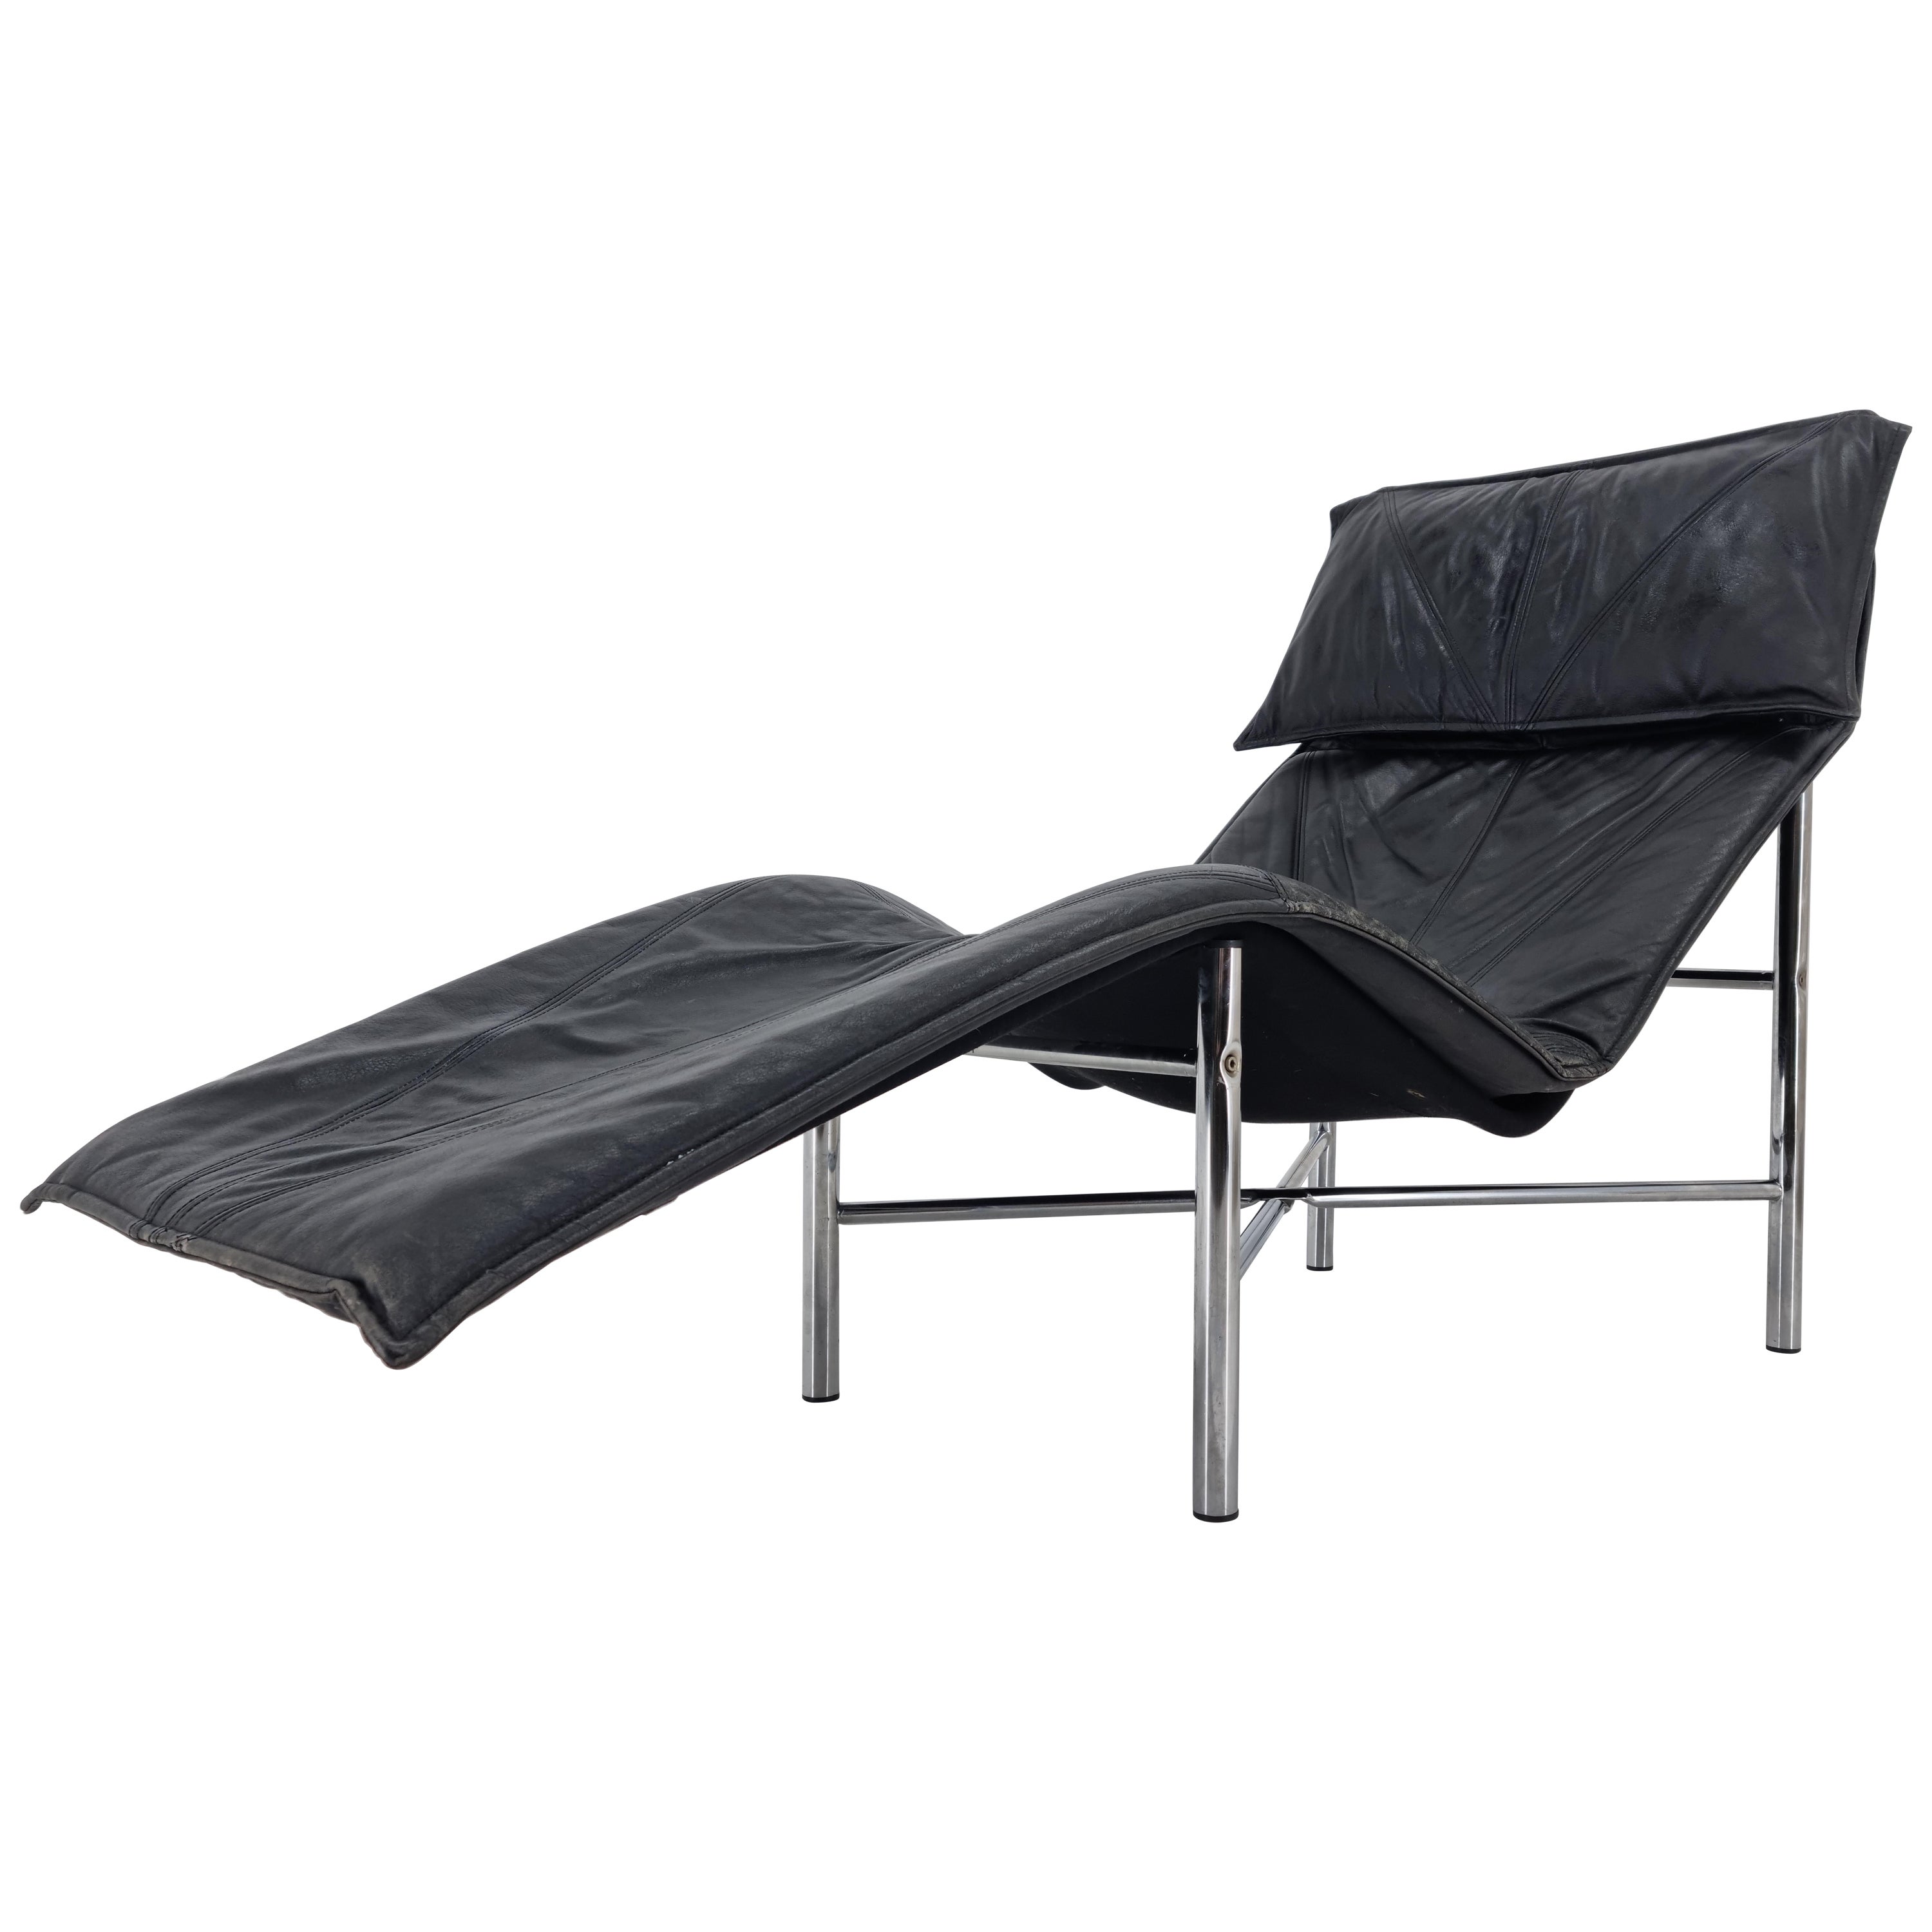 Midcentury Skye Chaise Lounge Chair for IKEA by Tord Björklund, Sweden, 1970s